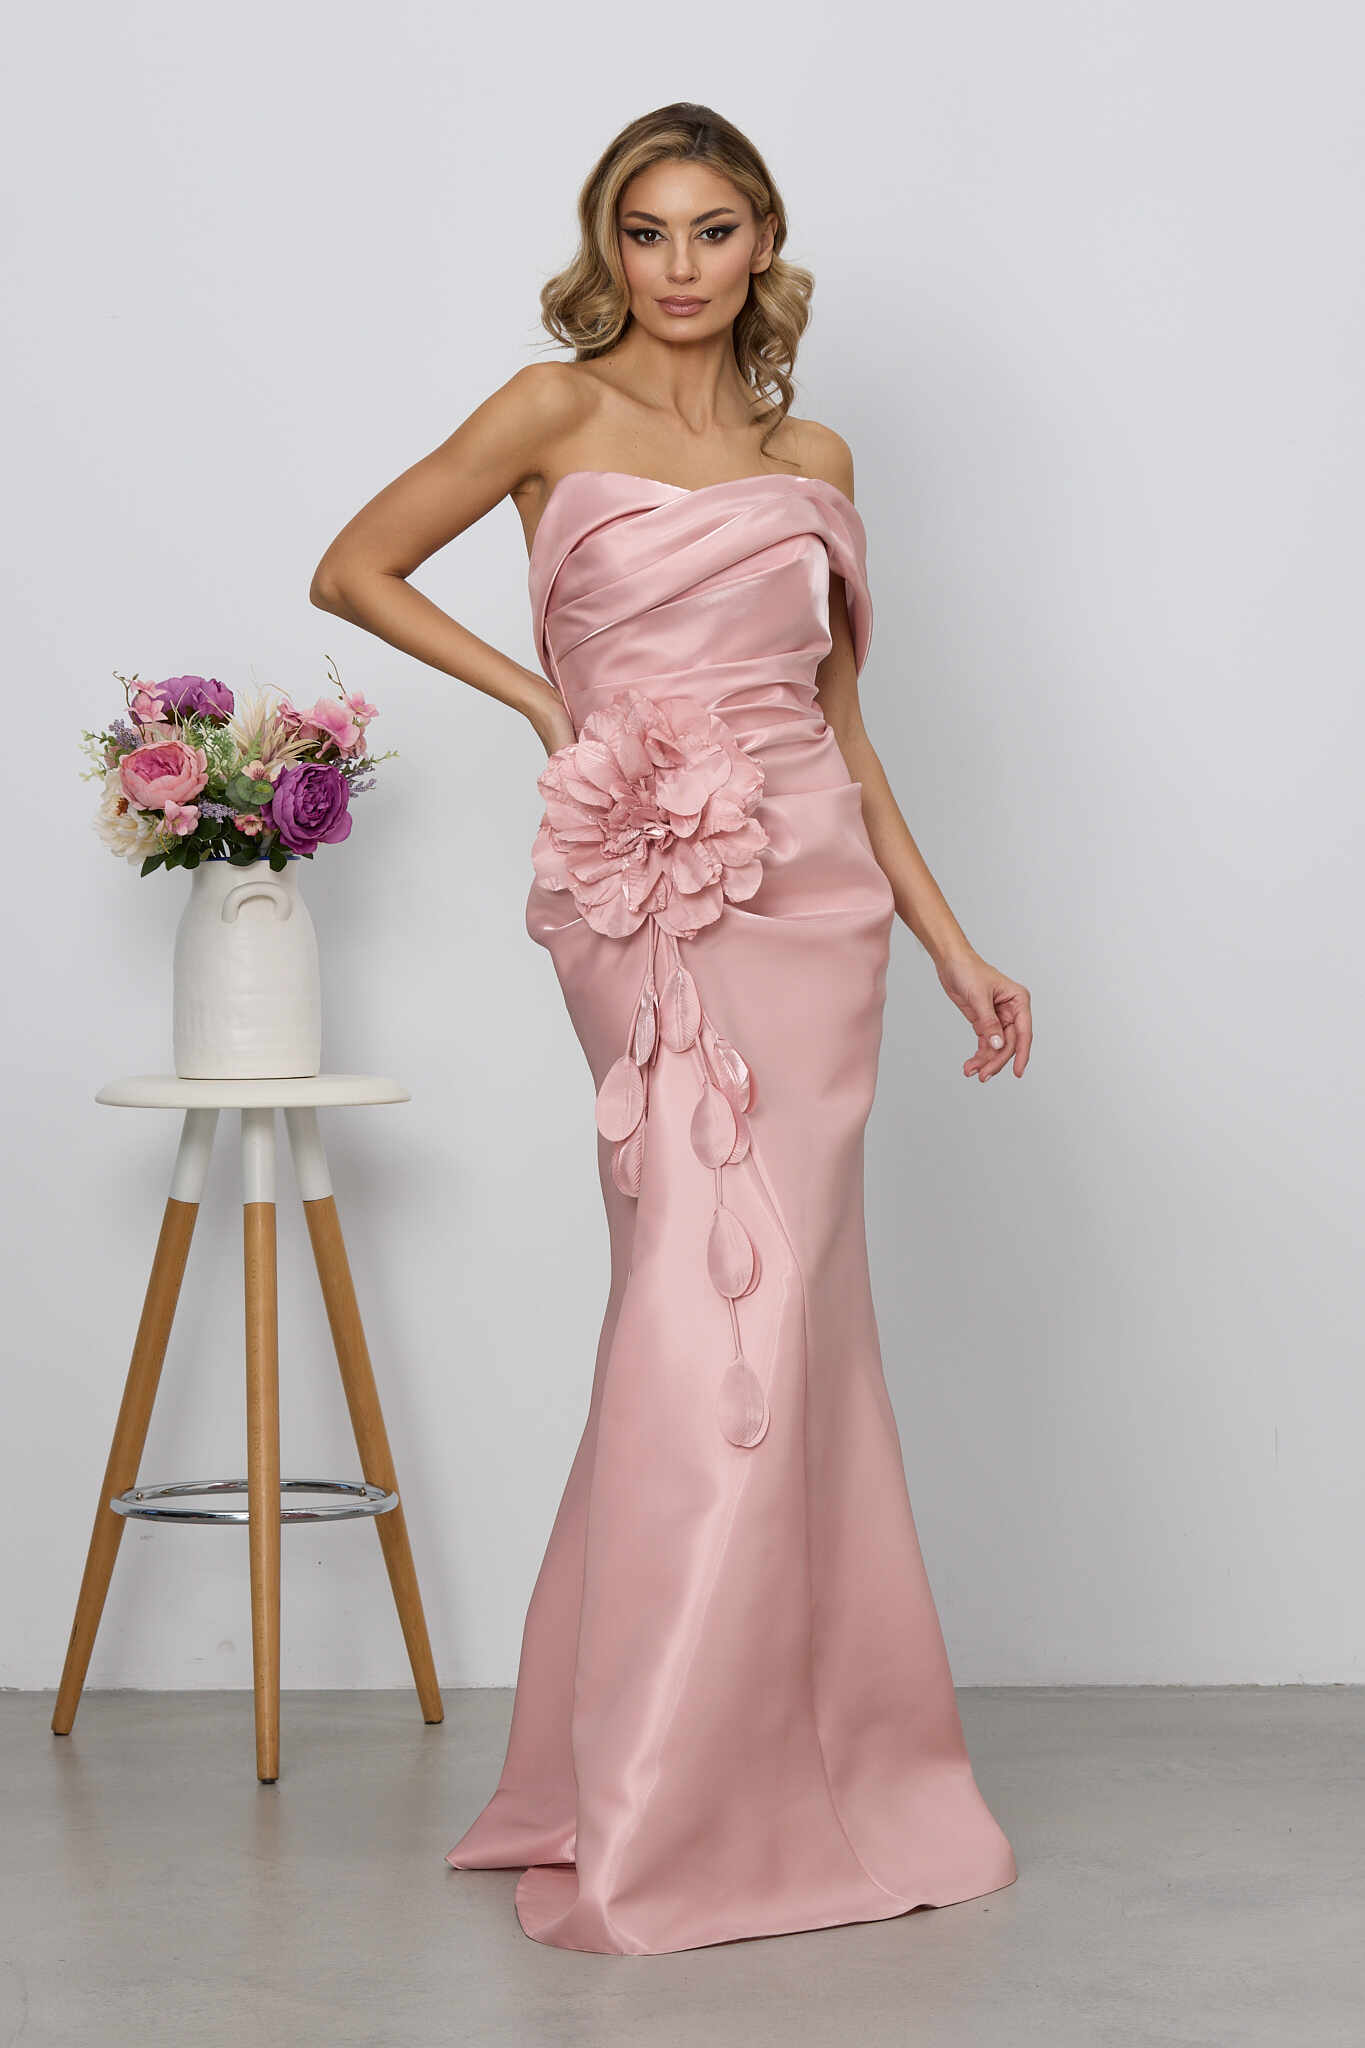 Rochie Couture Rose